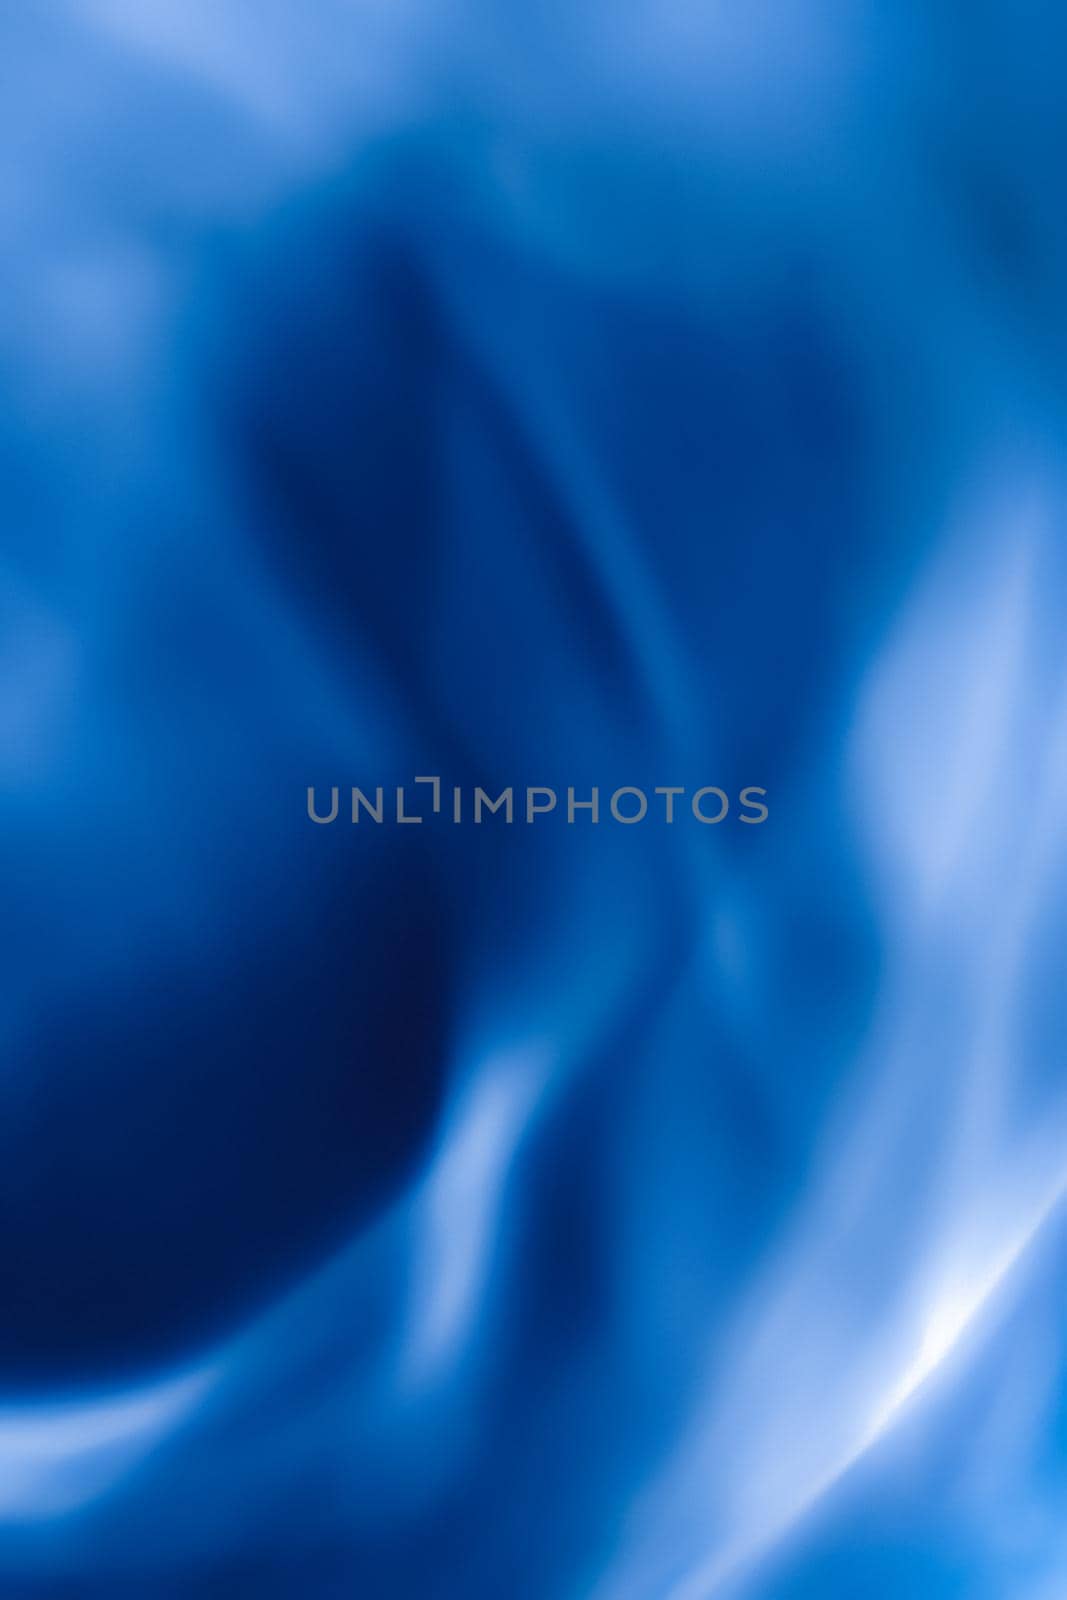 Holiday branding, beauty glamour and cyber backgrounds concept - Blue abstract art background, silk texture and wave lines in motion for classic luxury design